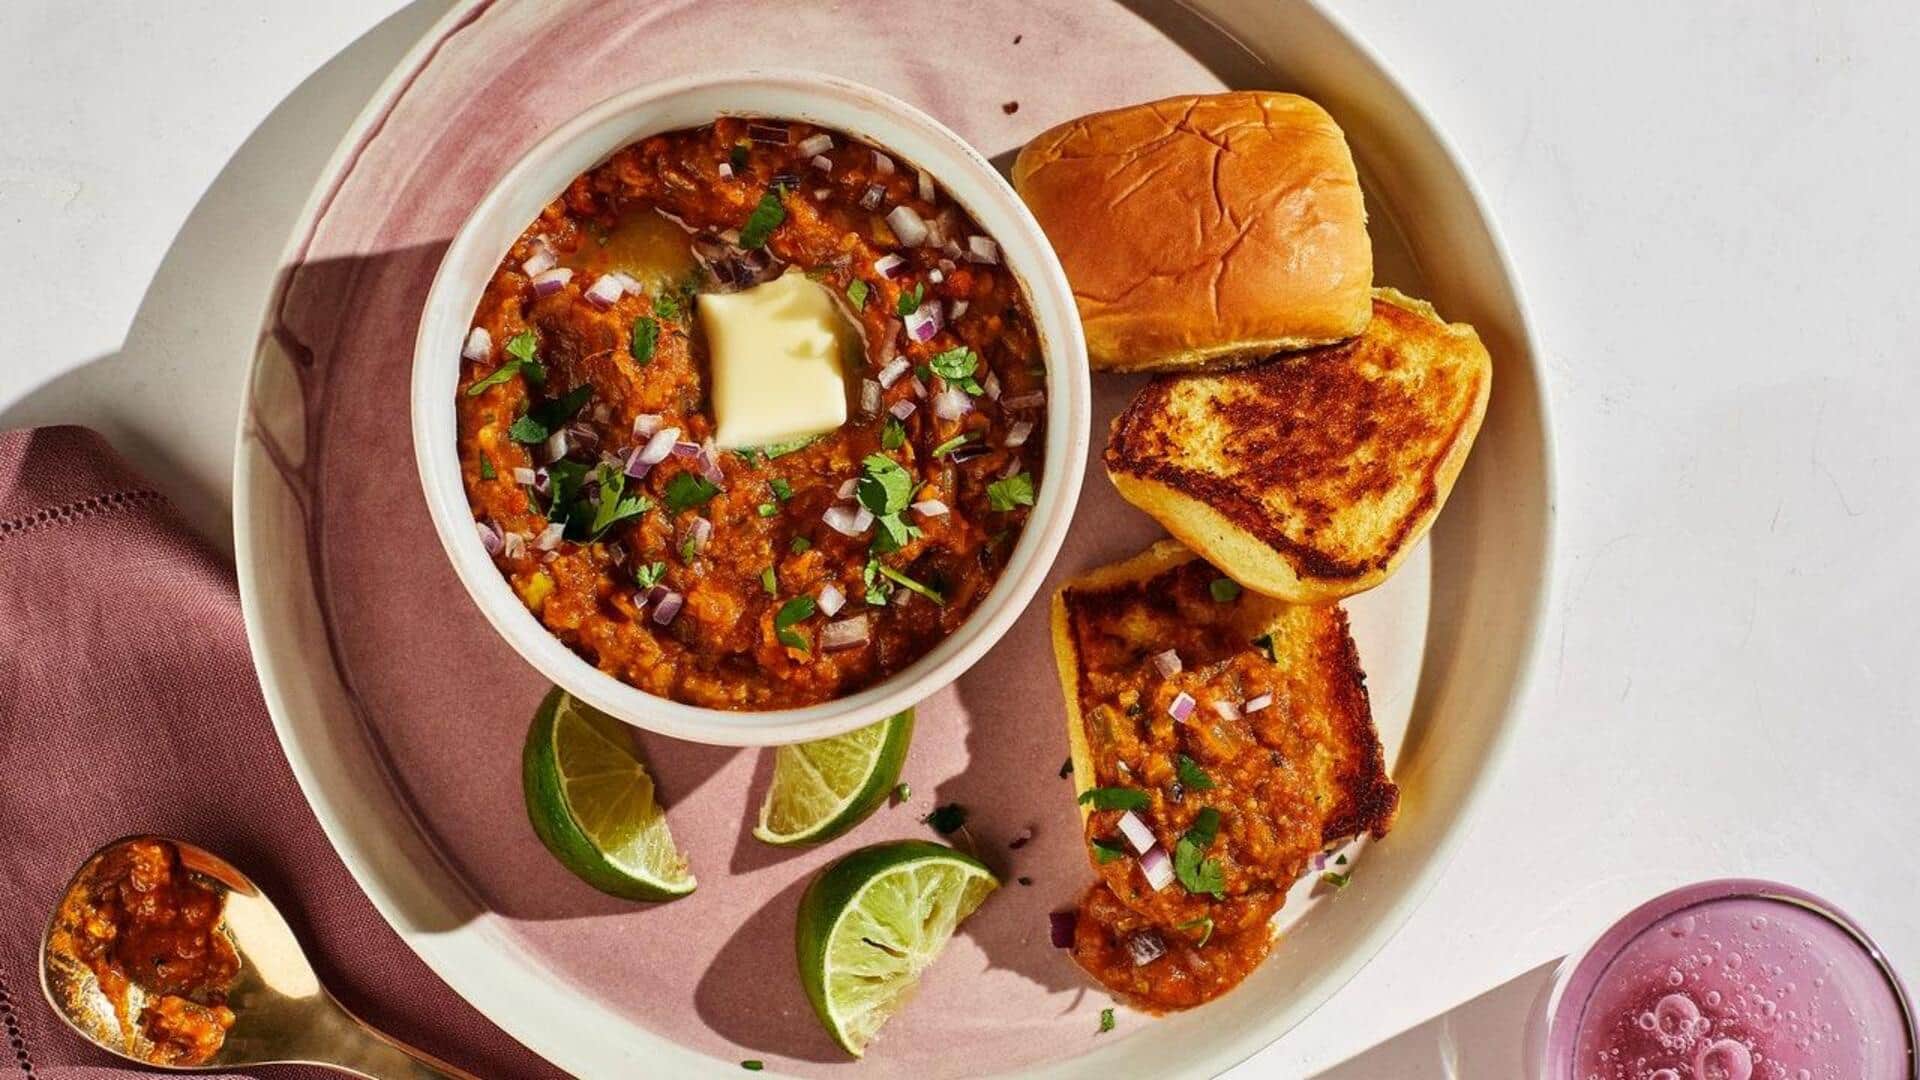 Craving some pav bhaji today? Try this recipe at home